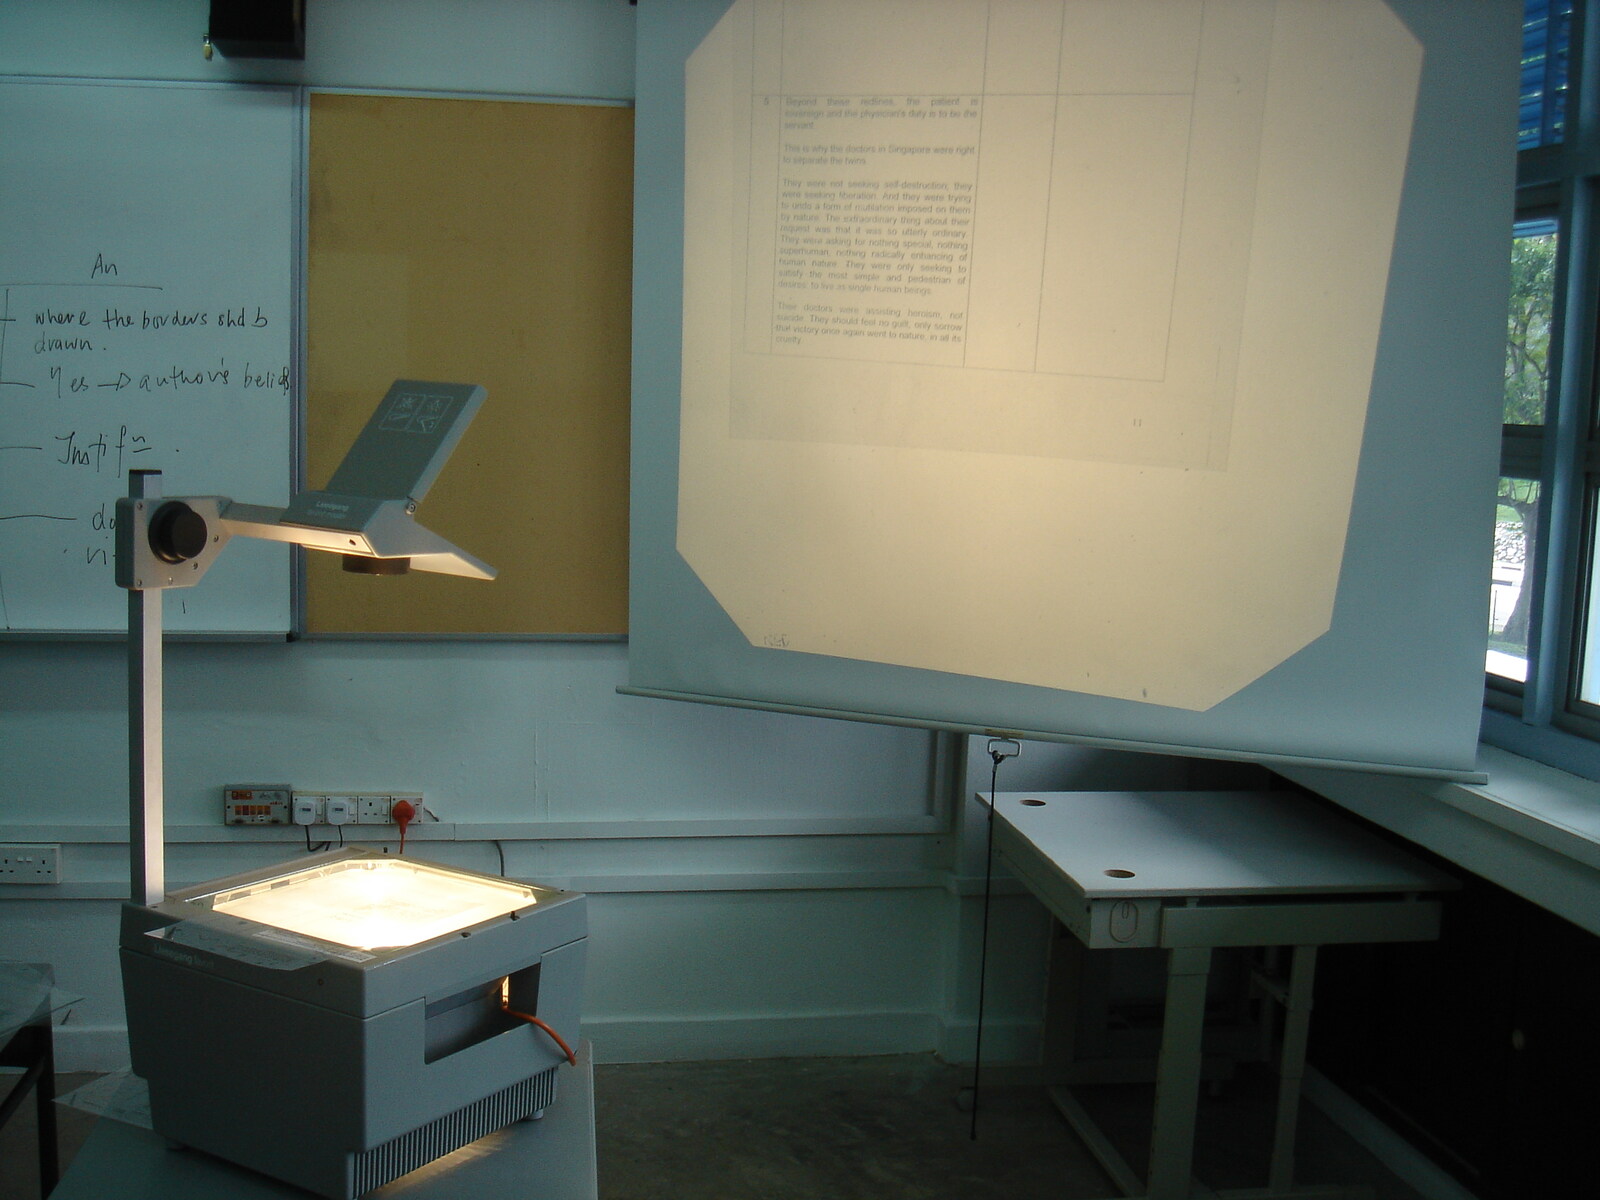 How To Make Transparencies For Overhead Projector